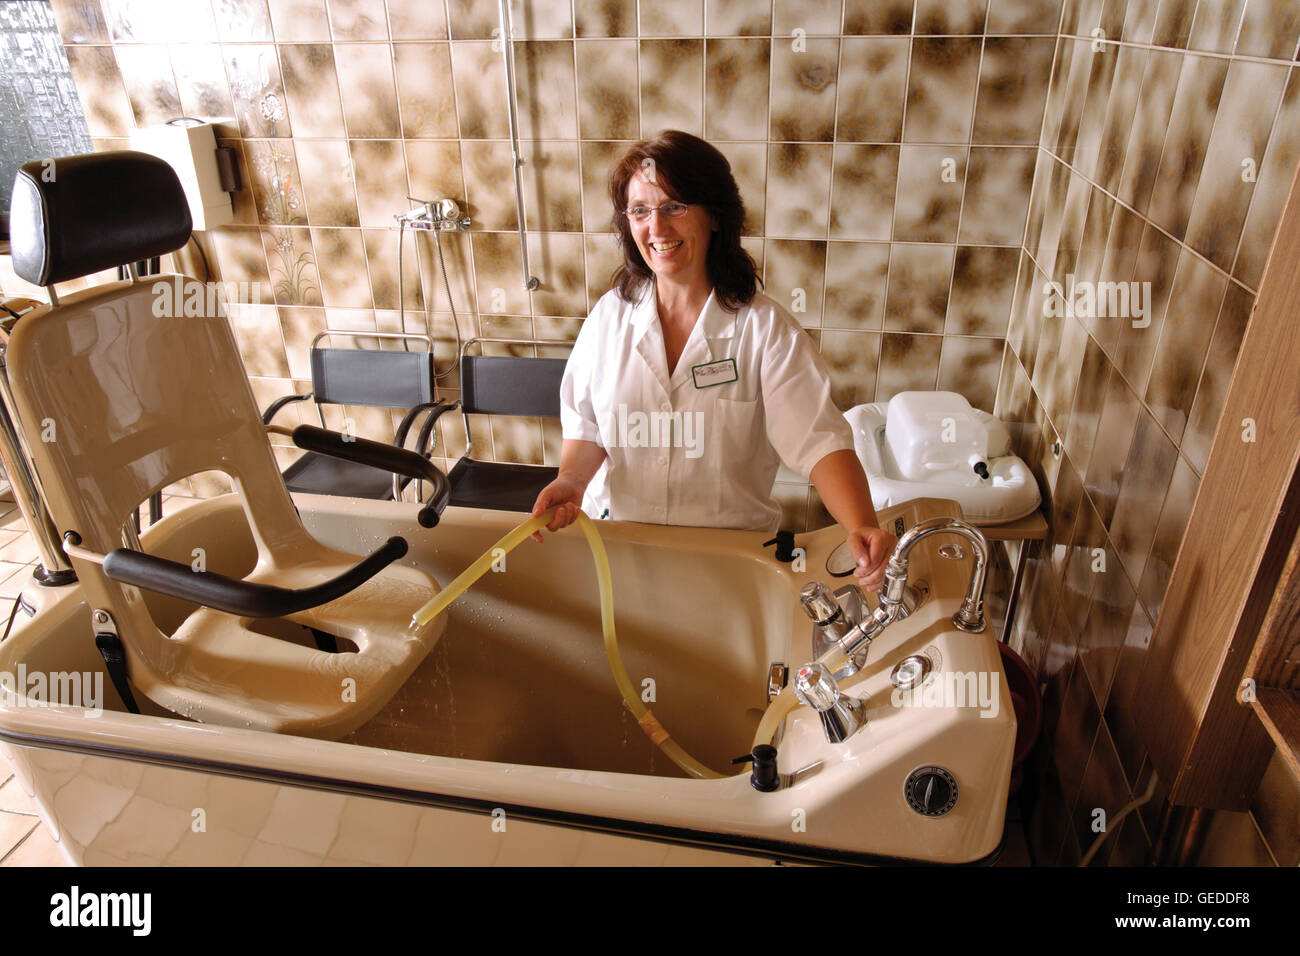 Nurse in a handicapped accessible bathroom at a nursing home Stock Photo